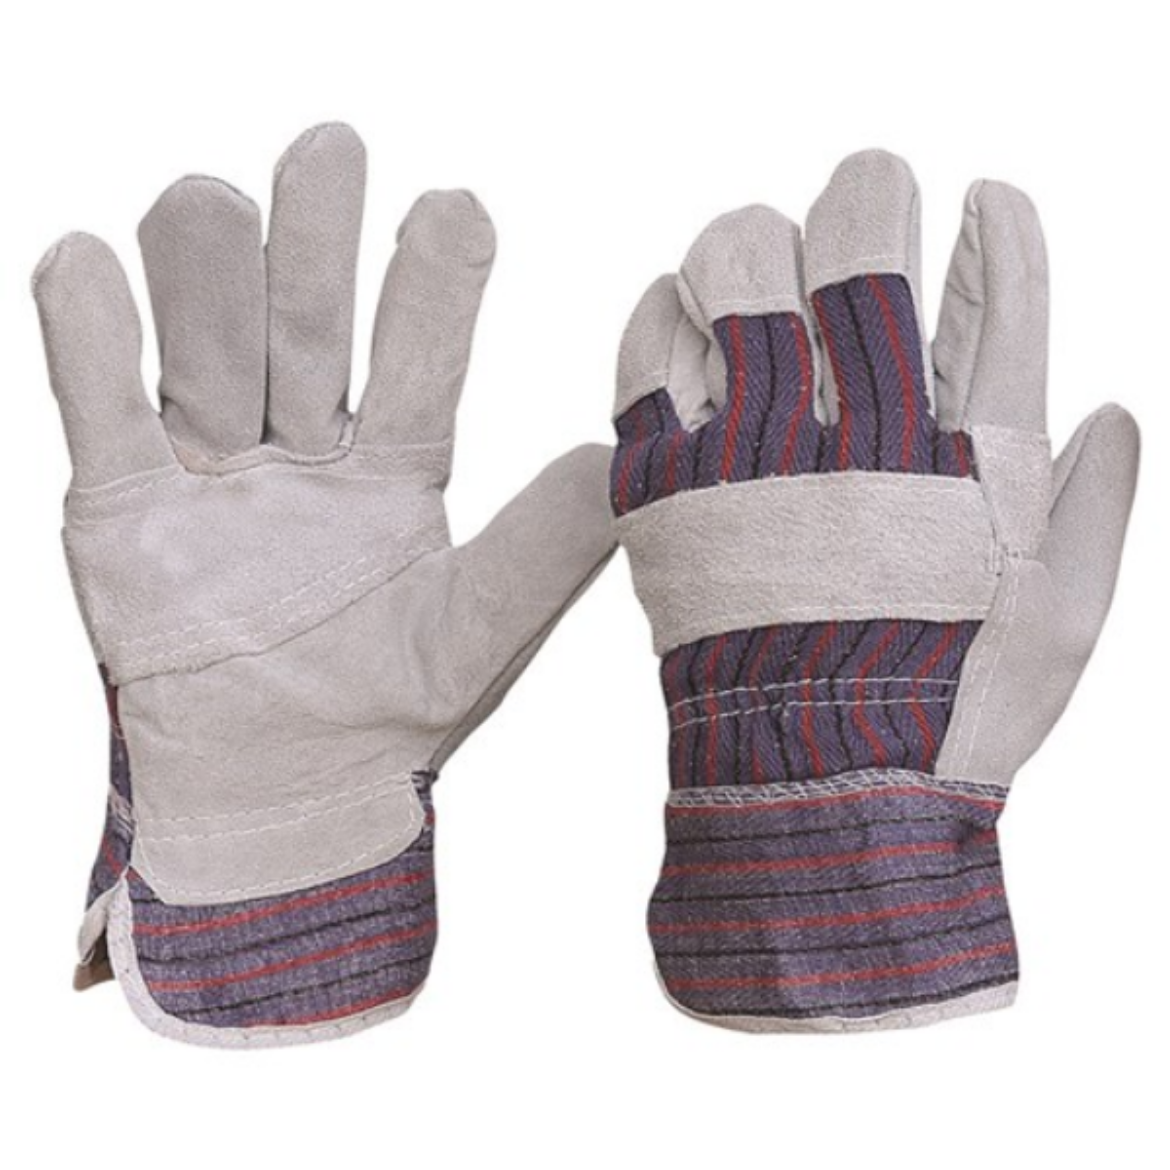 Picture of CANDY STRIPE COTTON BACK/COWSPLIT LEATHER PALM GLOVES - ONE SIZE FITS MOST. MOQ - 12.